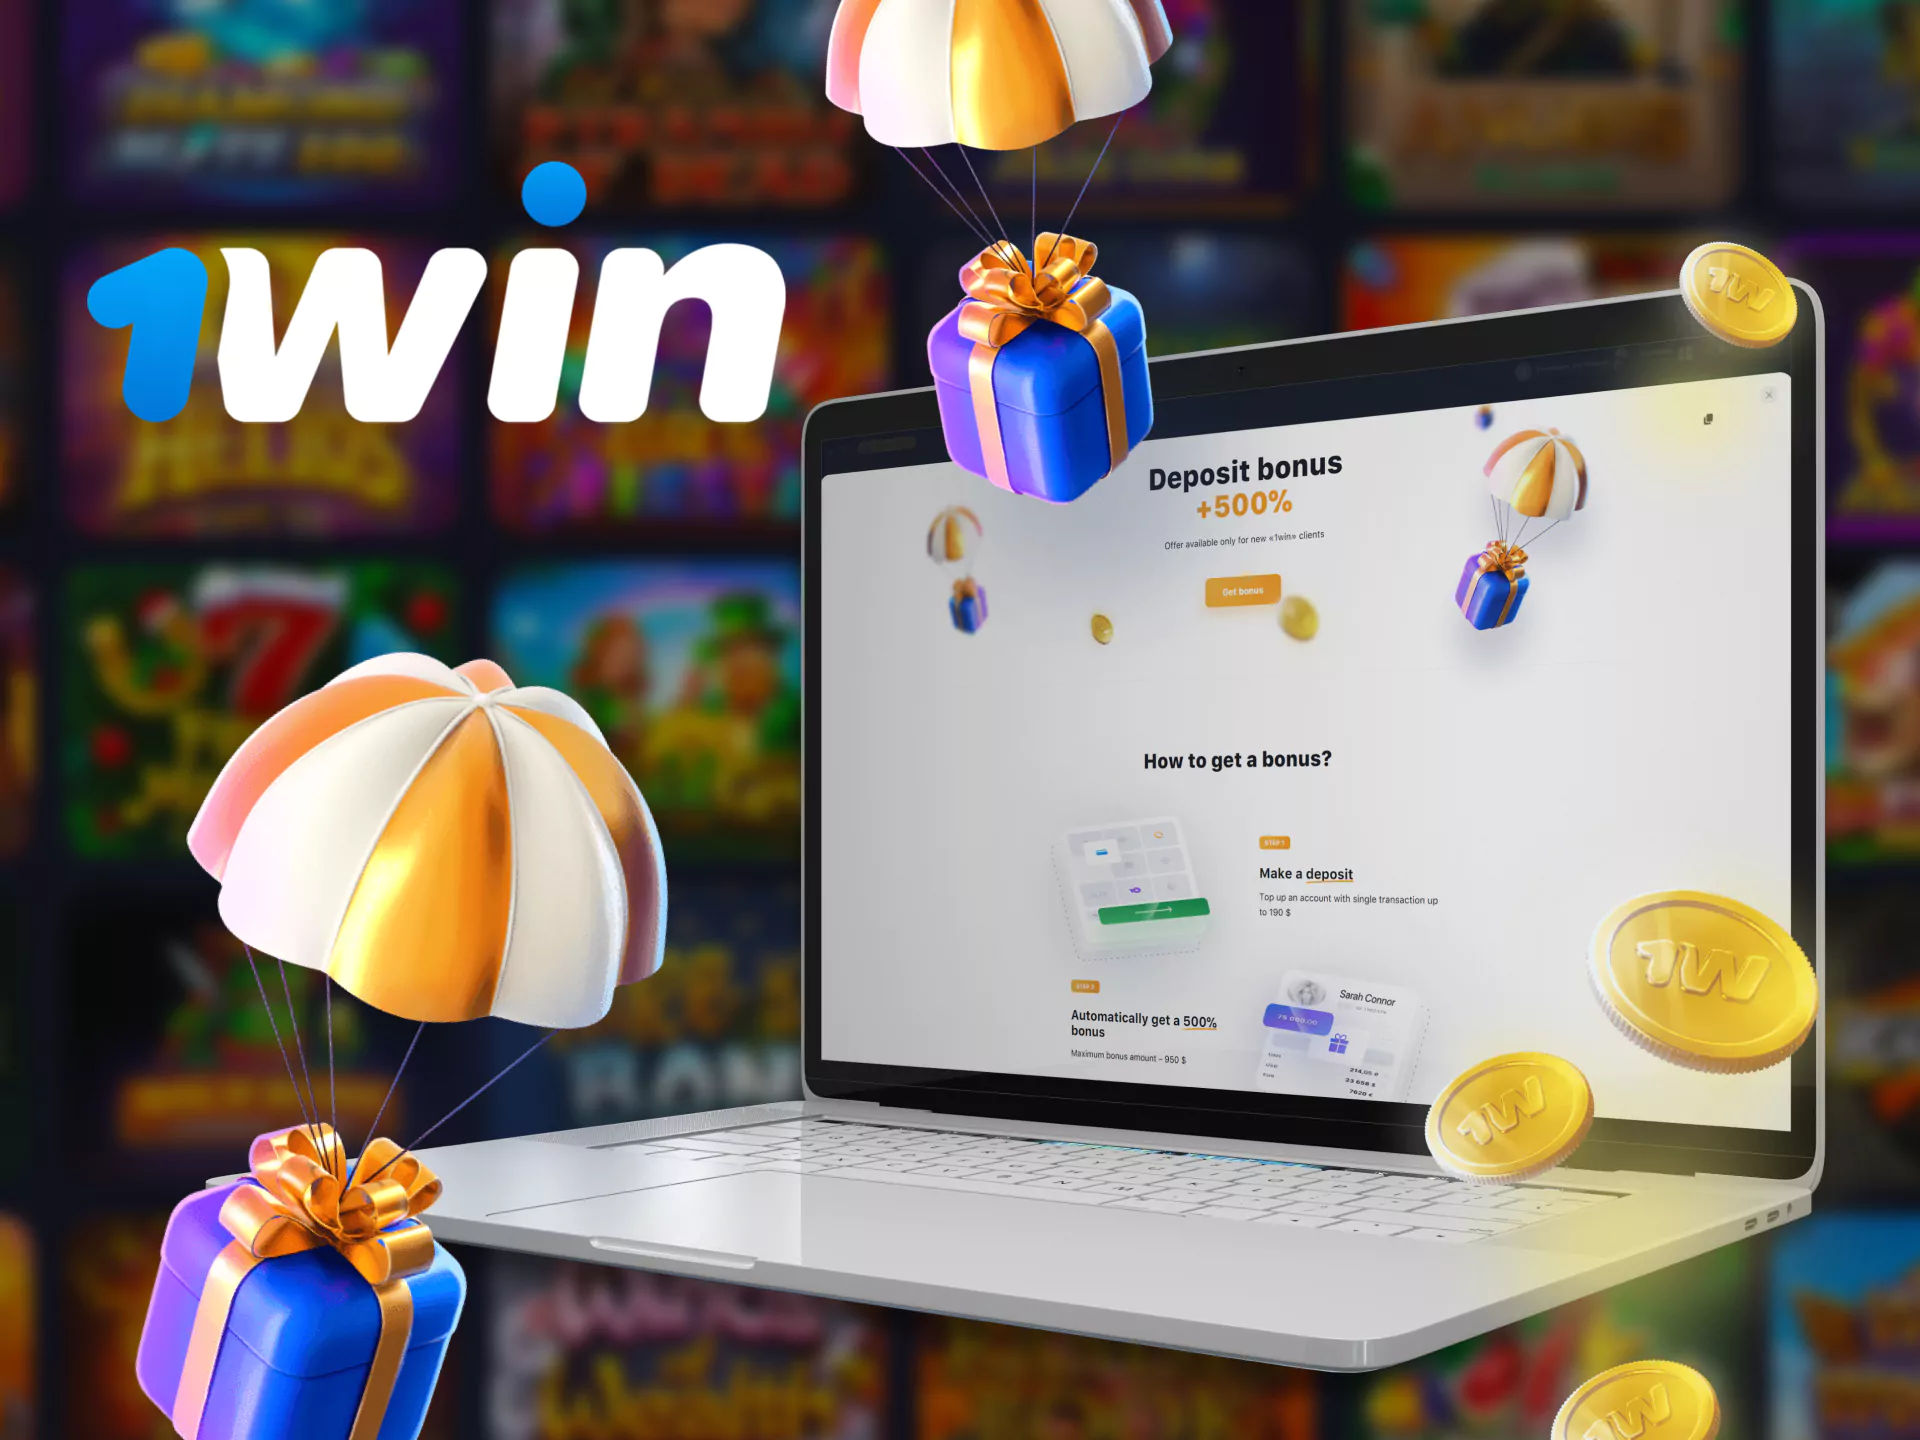 On 1Win, try a special first deposit bonus for the casino.